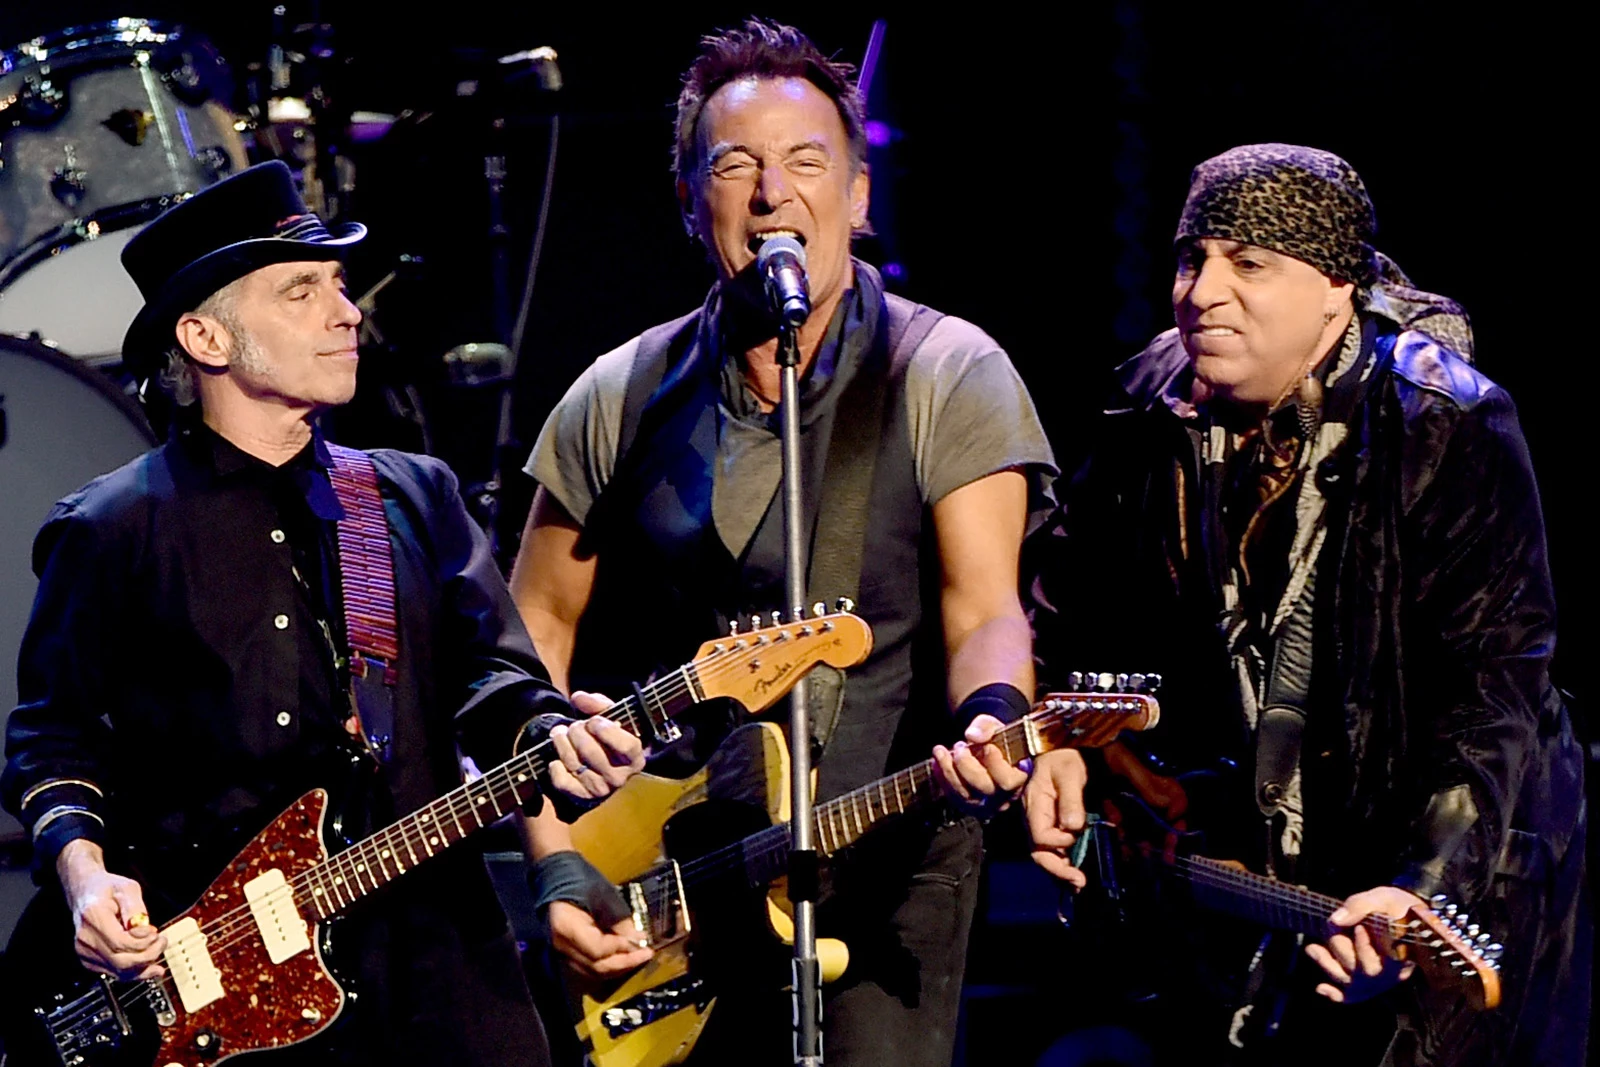 The Six-Year Wait for Bruce Springsteen's E Street Band Reunion